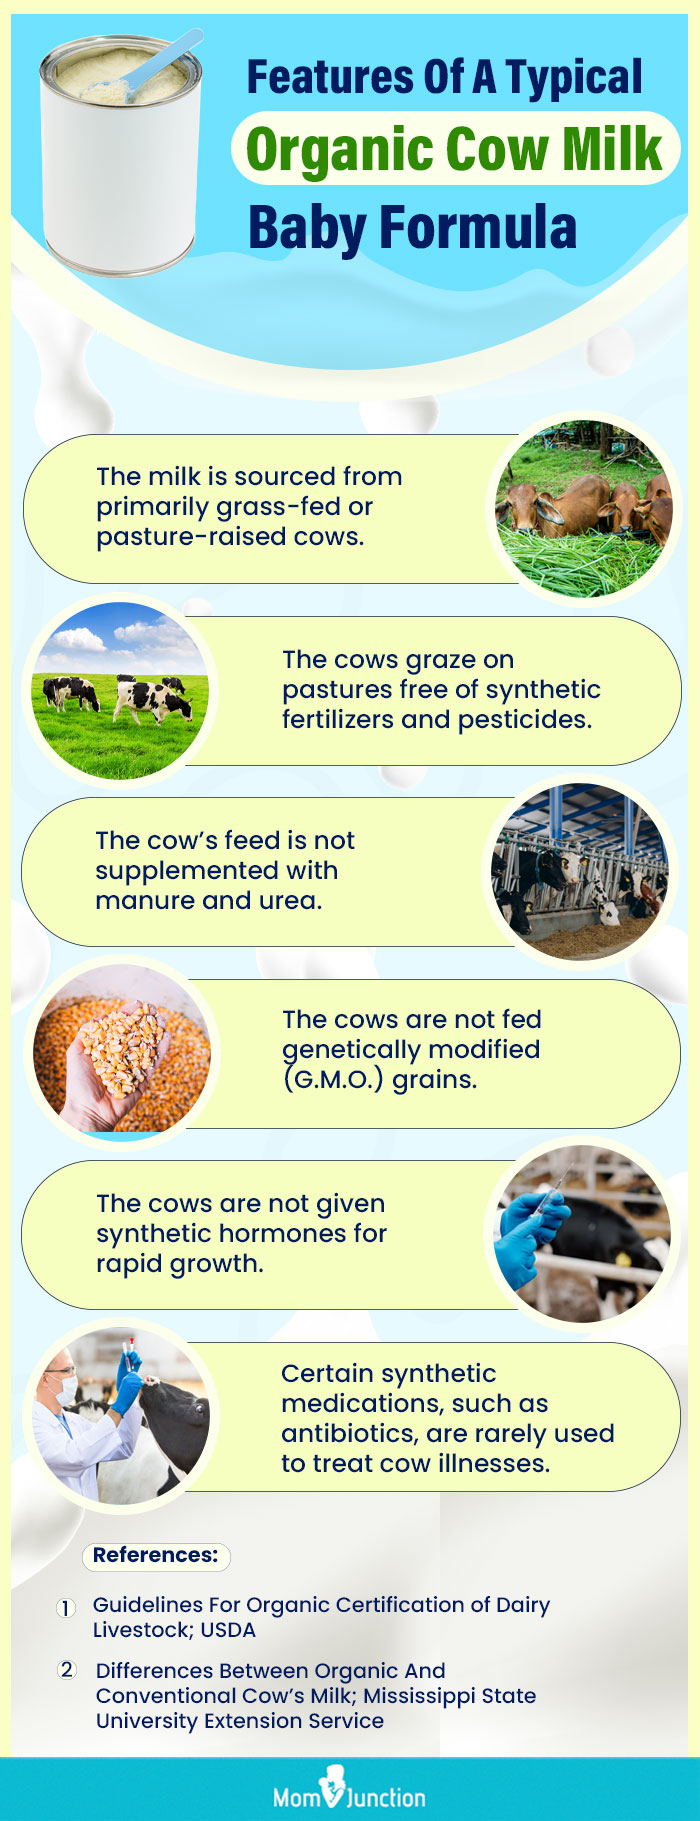 Features Of A Typical Organic Cow Milk Baby Formula (infographic)